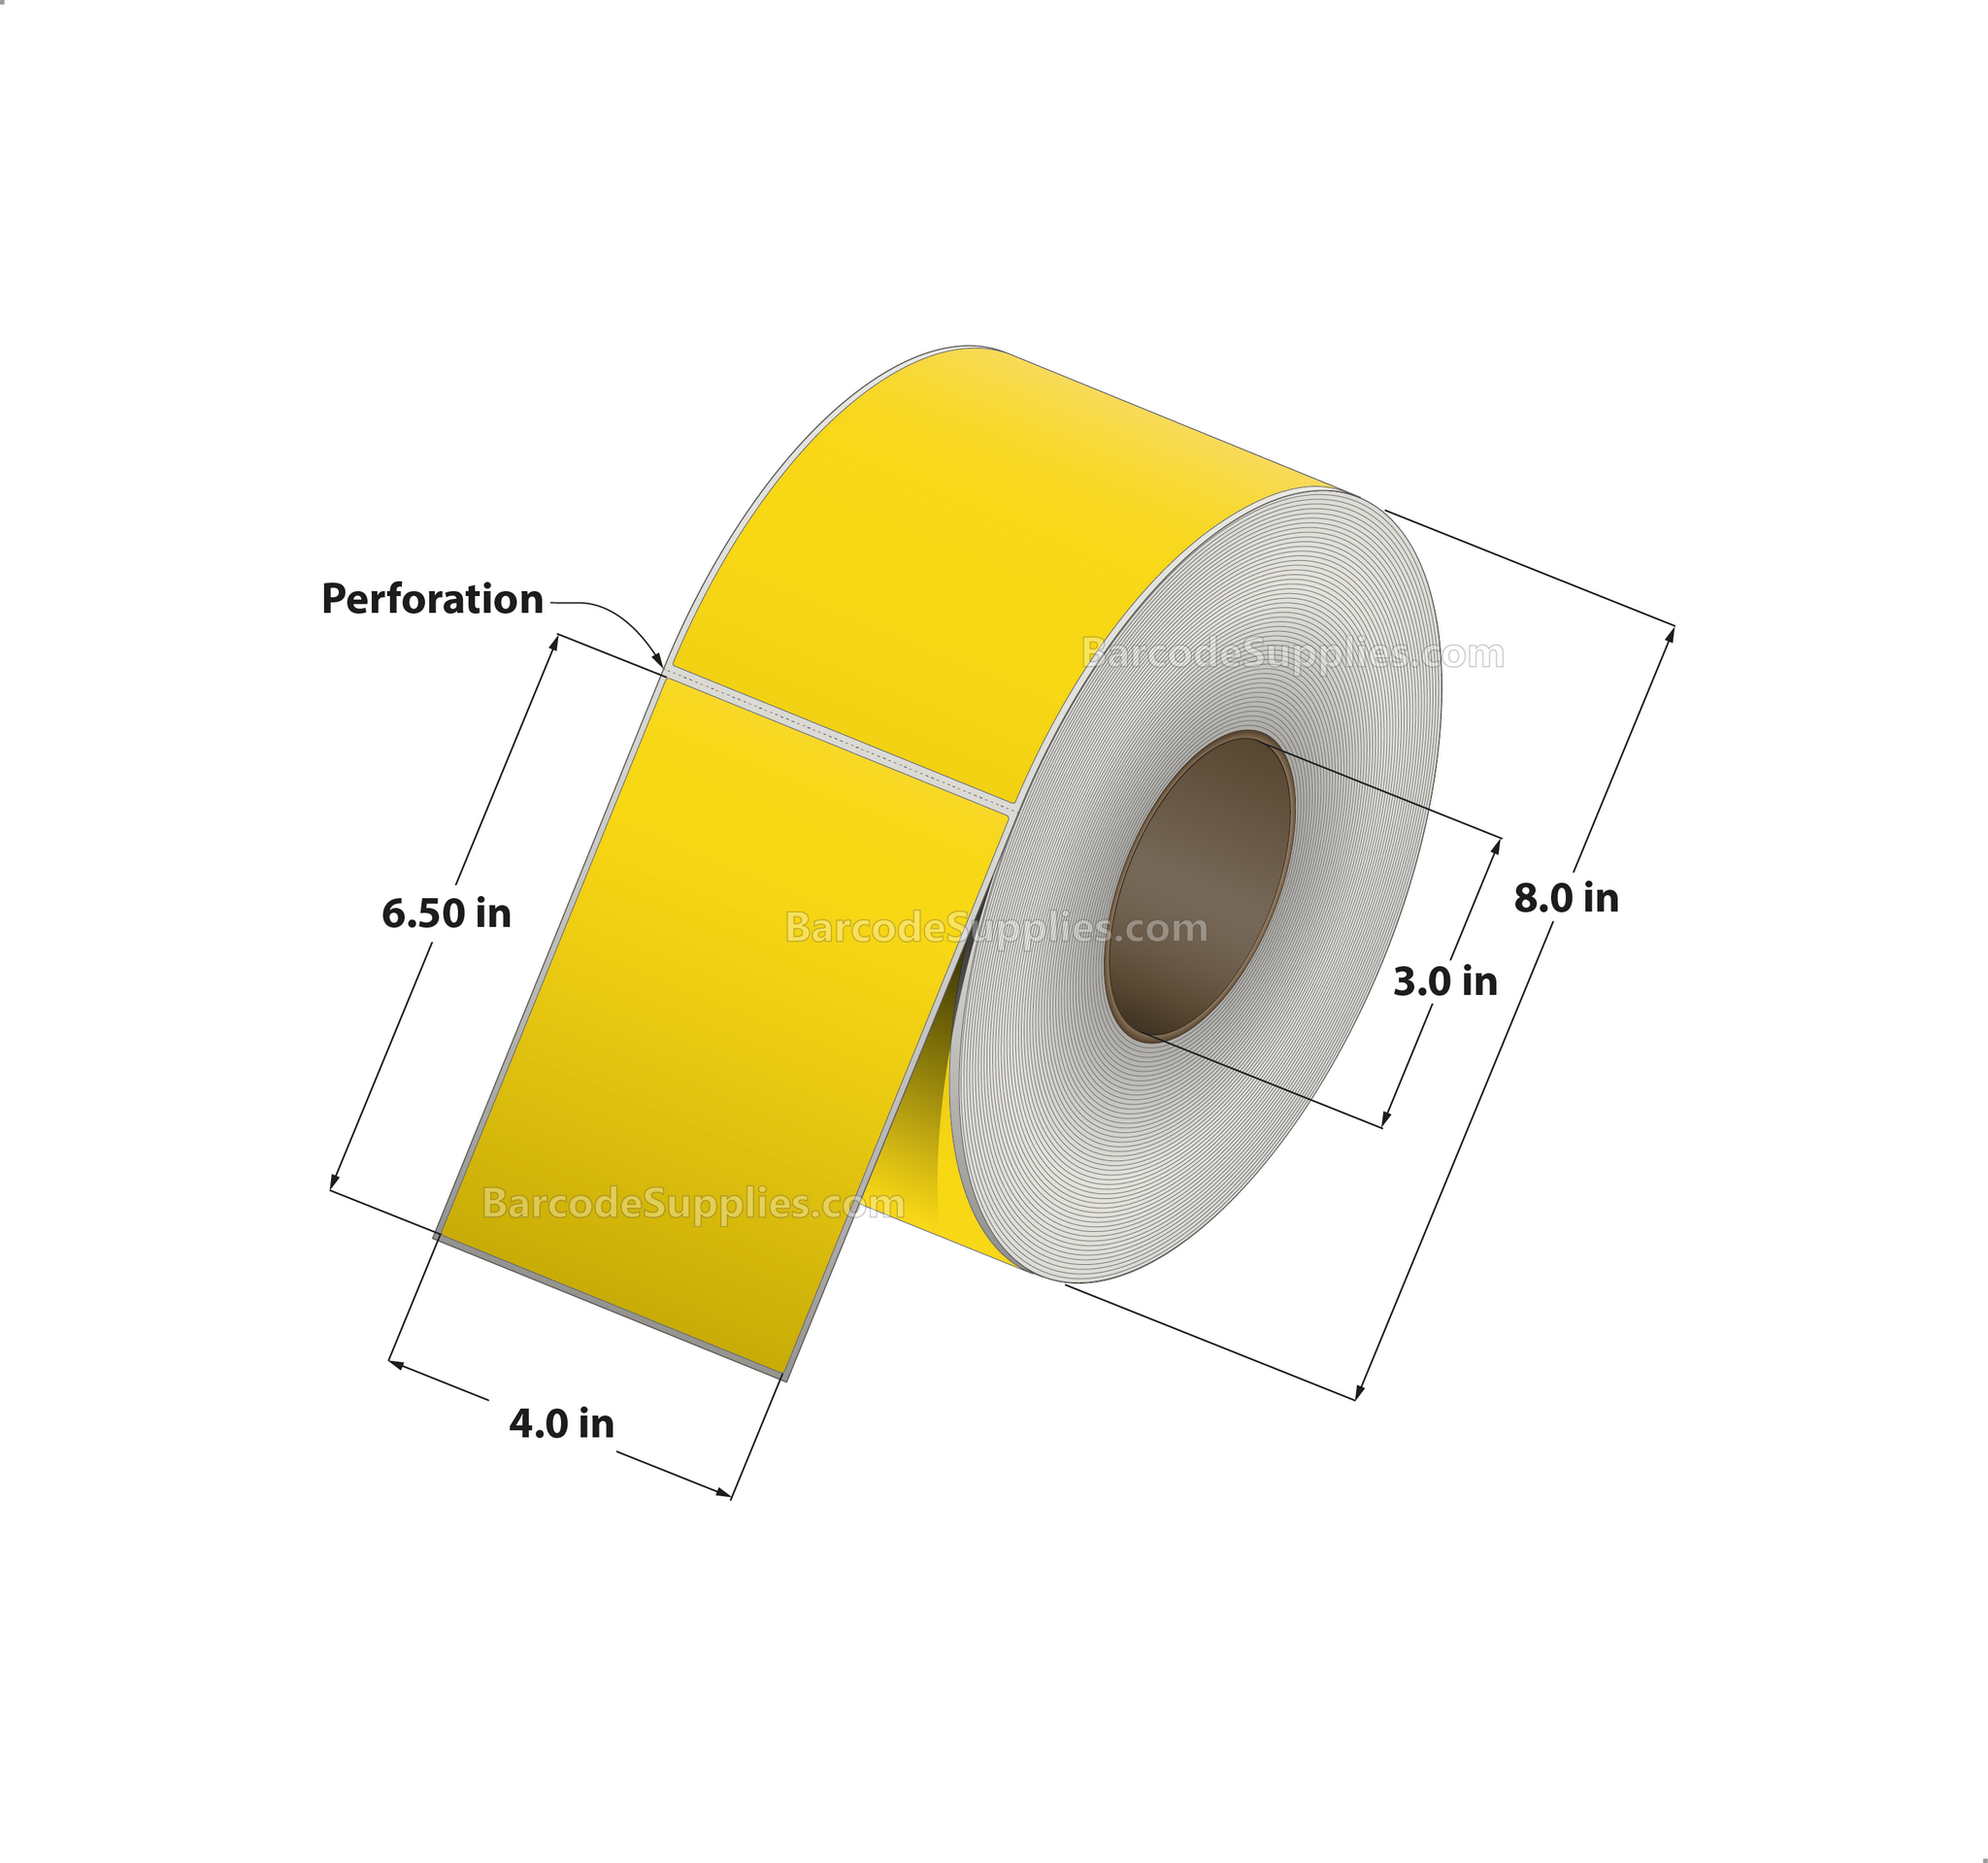 4 x 6.5 Thermal Transfer Pantone Yellow Labels With Permanent Acrylic Adhesive - Perforated - 900 Labels Per Roll - Carton Of 4 Rolls - 3600 Labels Total - MPN: TH465-1PY